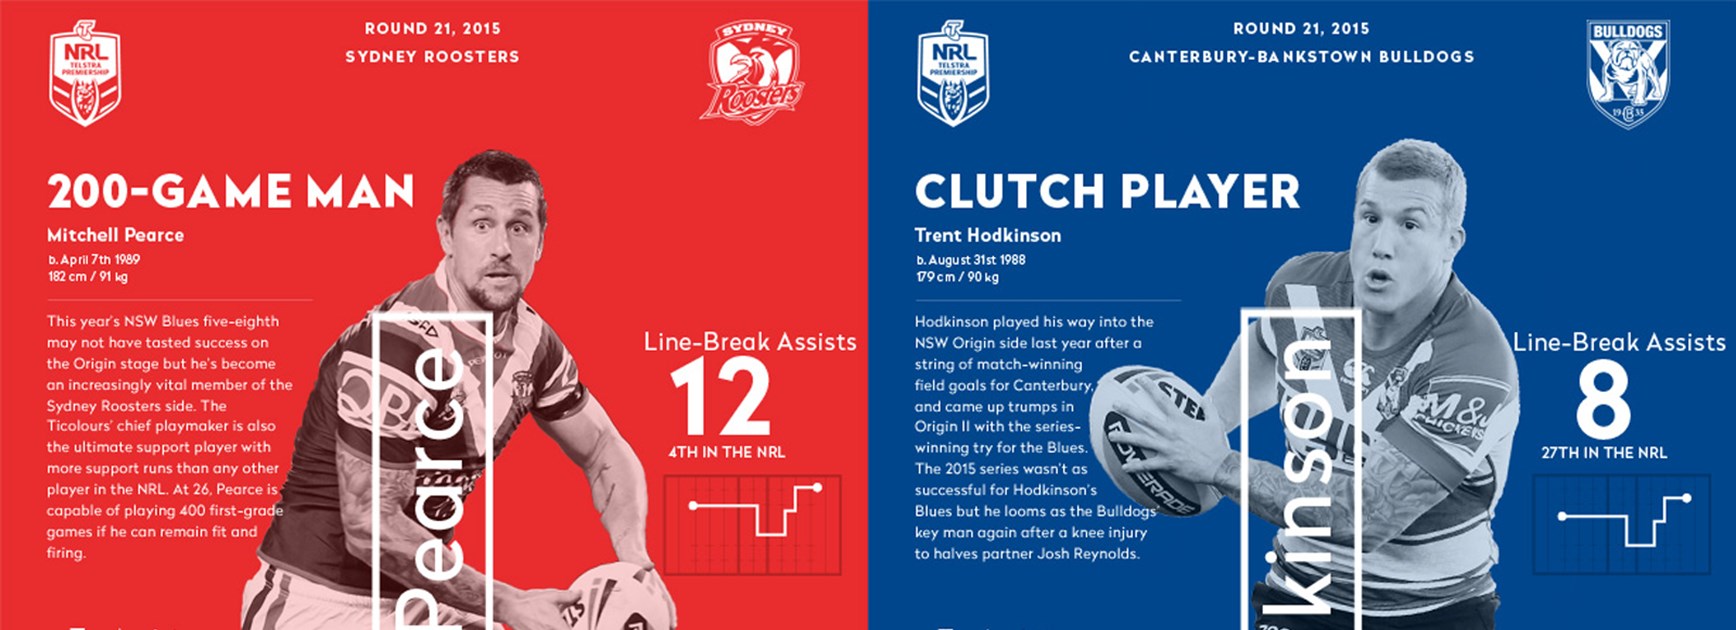 NSW halves Mitchell Pearce and Trent Hodkinson will line up against each other at club level on Friday night.